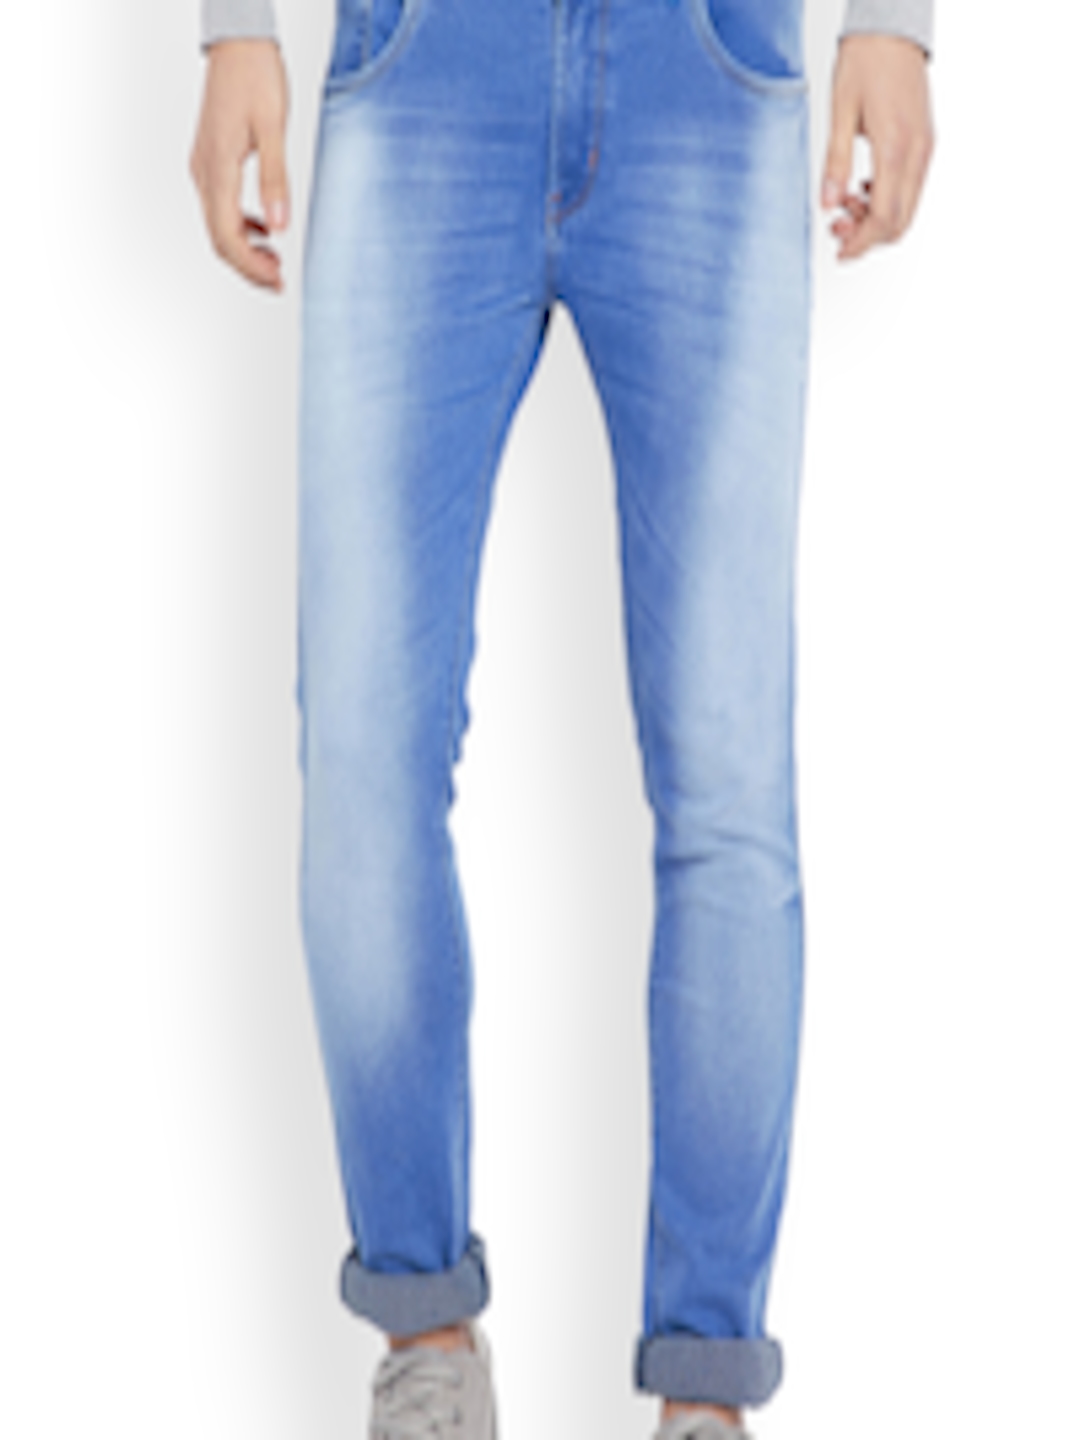 Buy Stylox Men Blue Slim Fit Mid Rise Clean Look Stretchable Jeans ...